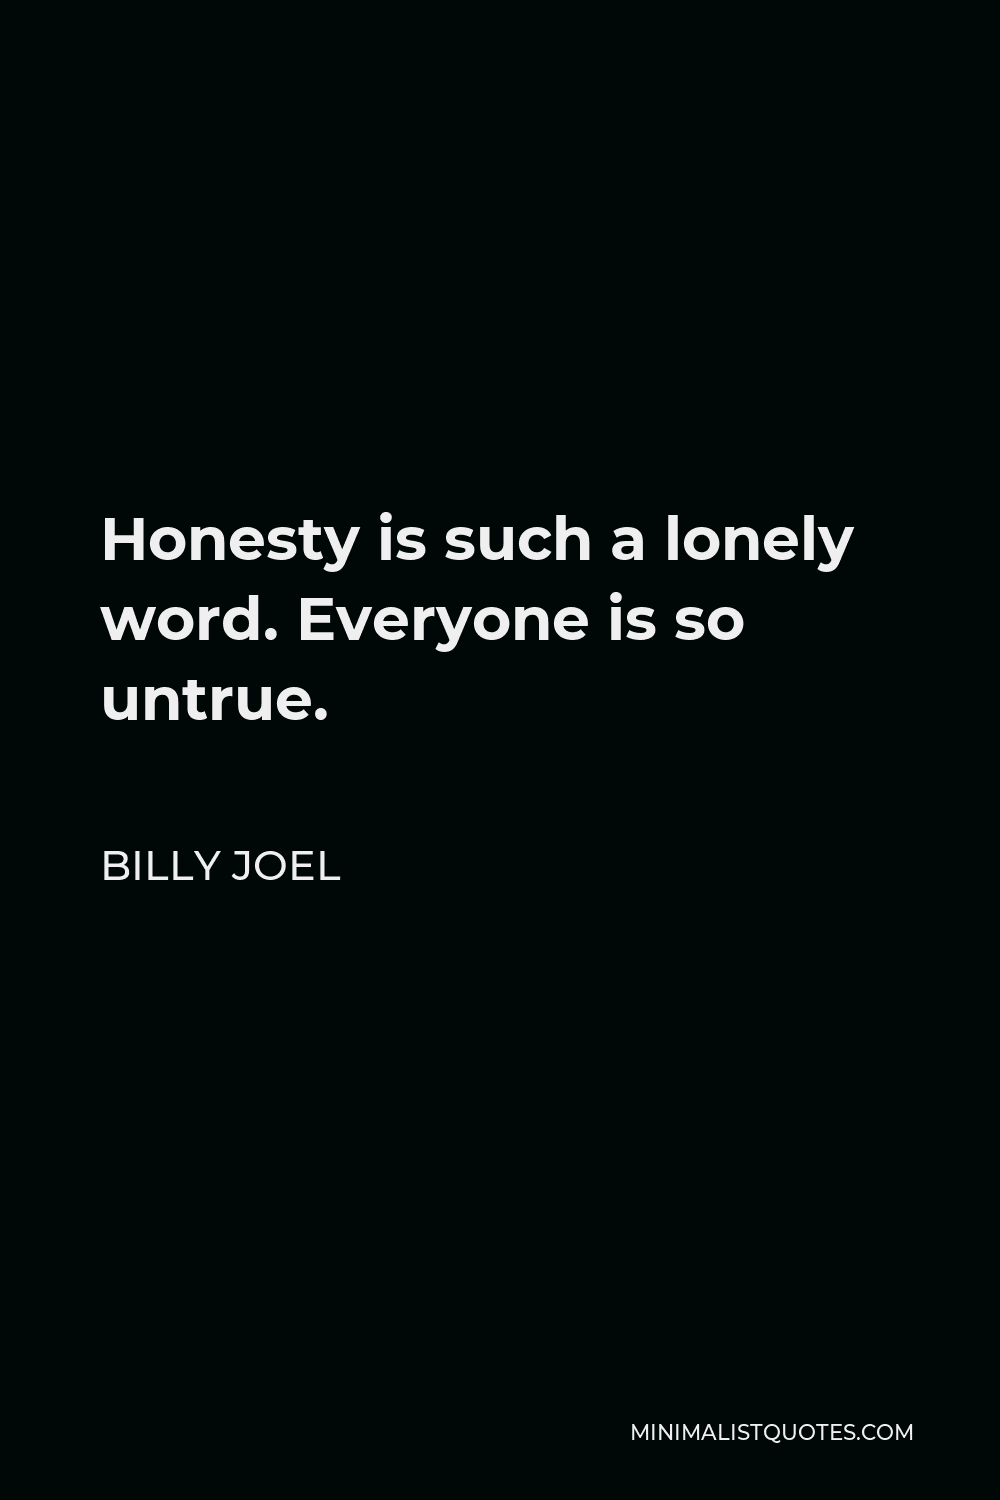 Billy Joel Quote - Honesty is such a lonely word. Everyone is so untrue.